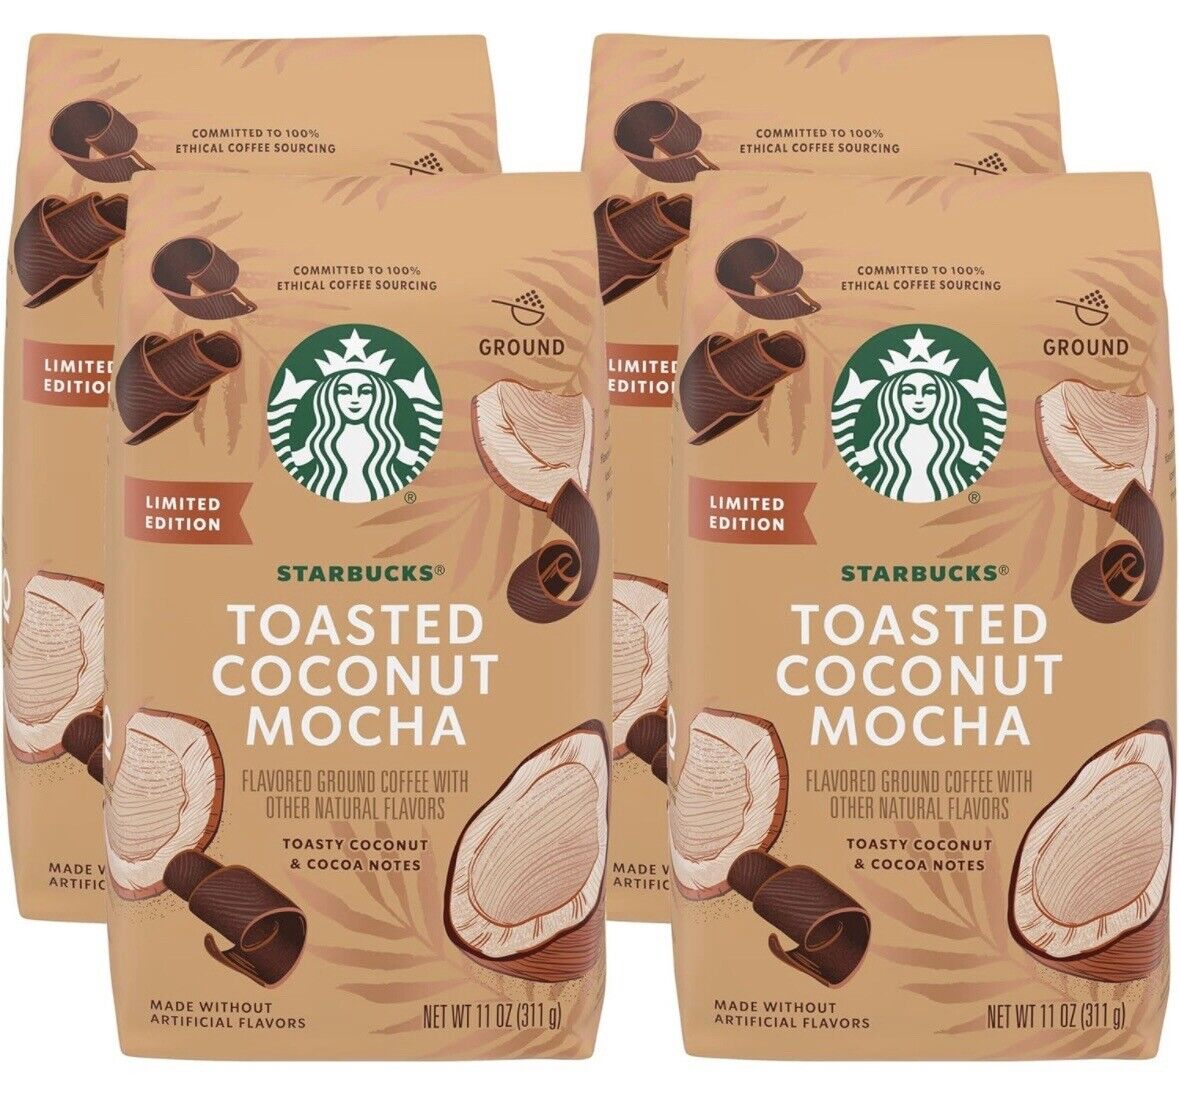 Starbucks Toasted Coconut Mocha Flavored Ground Coffee, 11 oz (pack of 6)